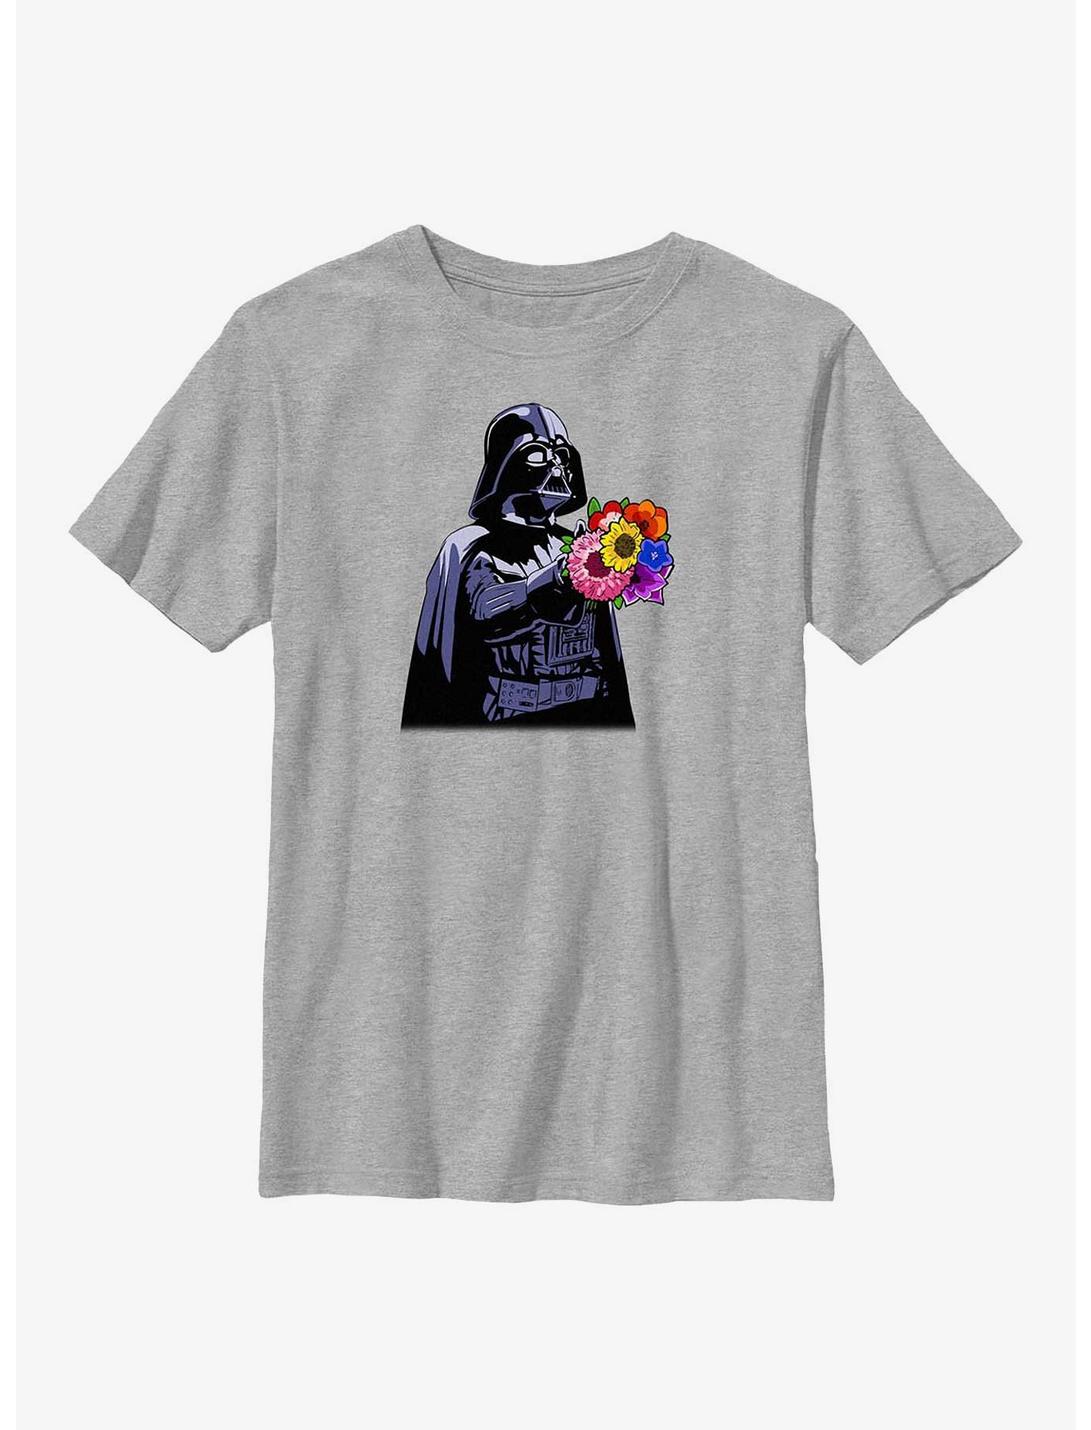 Star Wars Vader Handing Flowers Youth T-Shirt, ATH HTR, hi-res